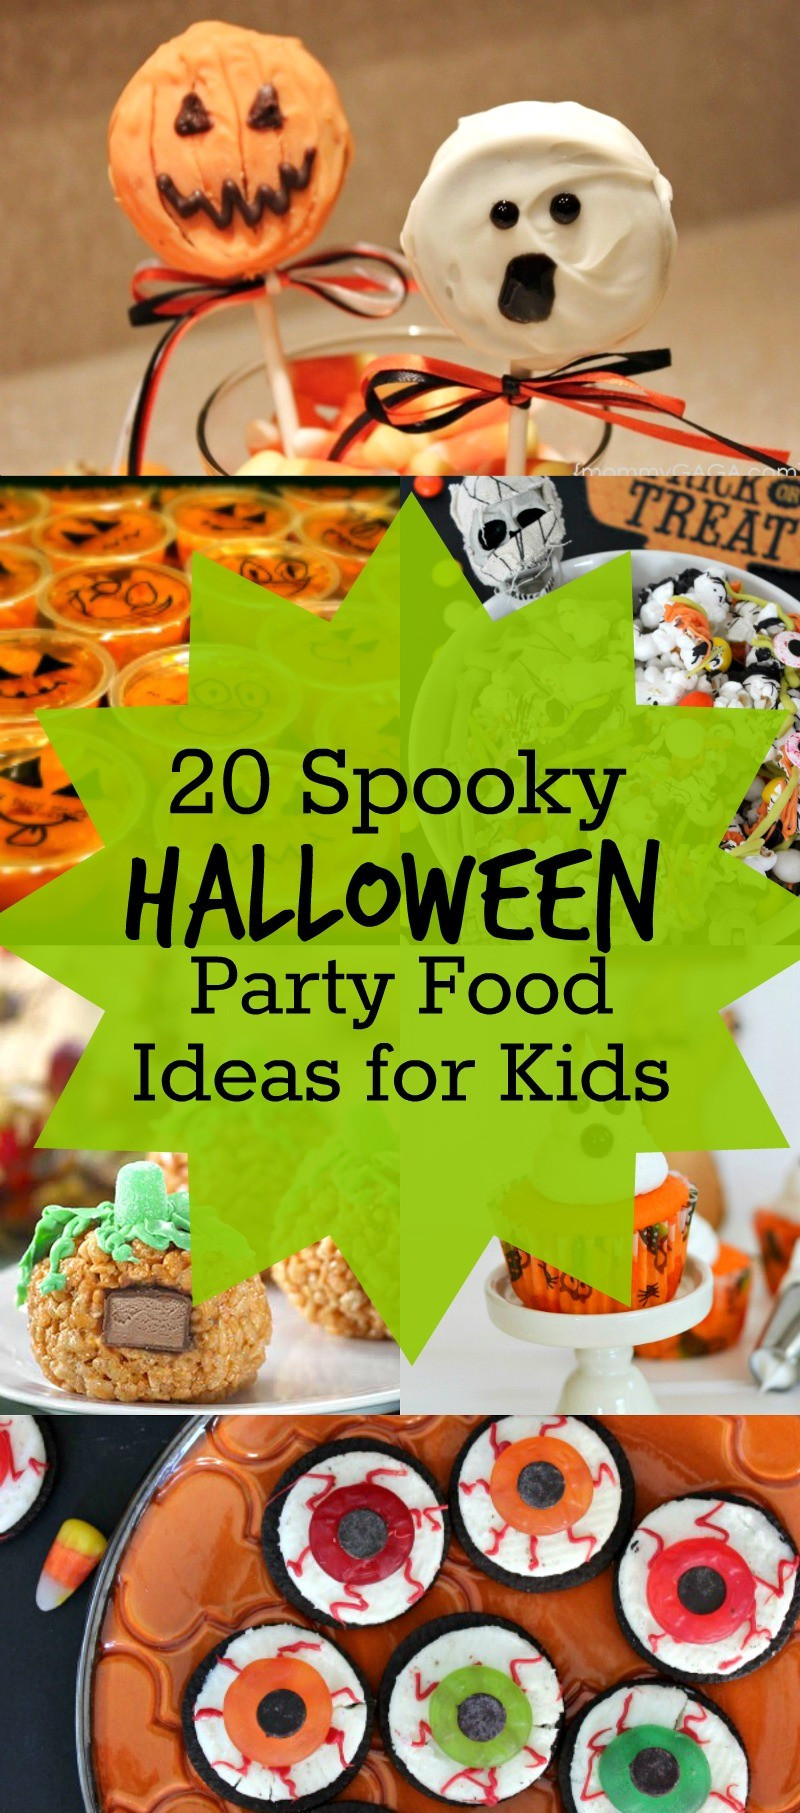 Halloween Snack Ideas For Kids Party
 20 Spooky Halloween Party Food Ideas for Kids Such cute